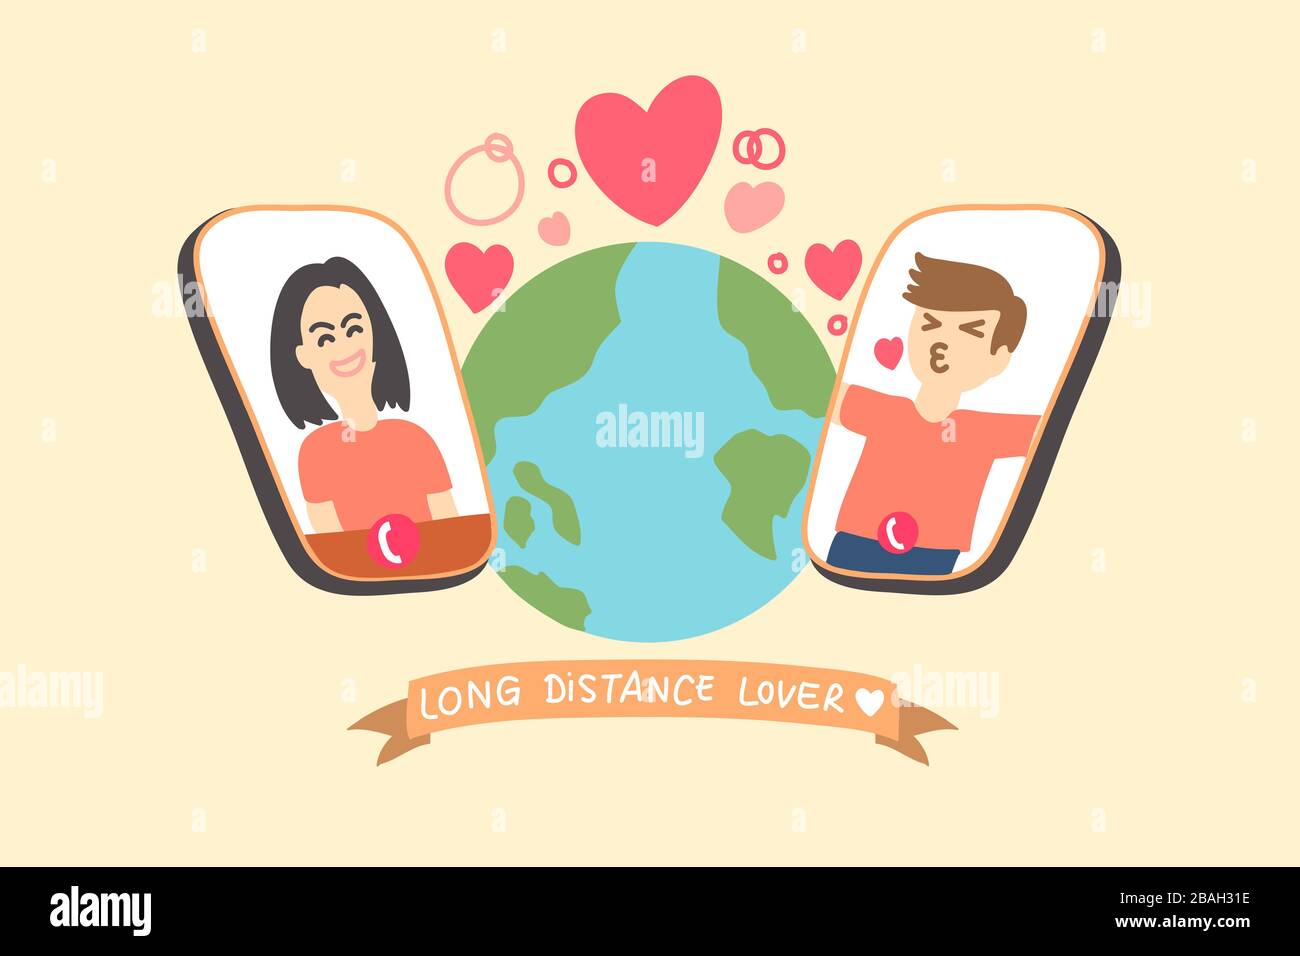 Long distance lover concept, drawing vector illustration about oversea couple connecting by smartphone. Suitable for working, dating, disease or epime Stock Vector